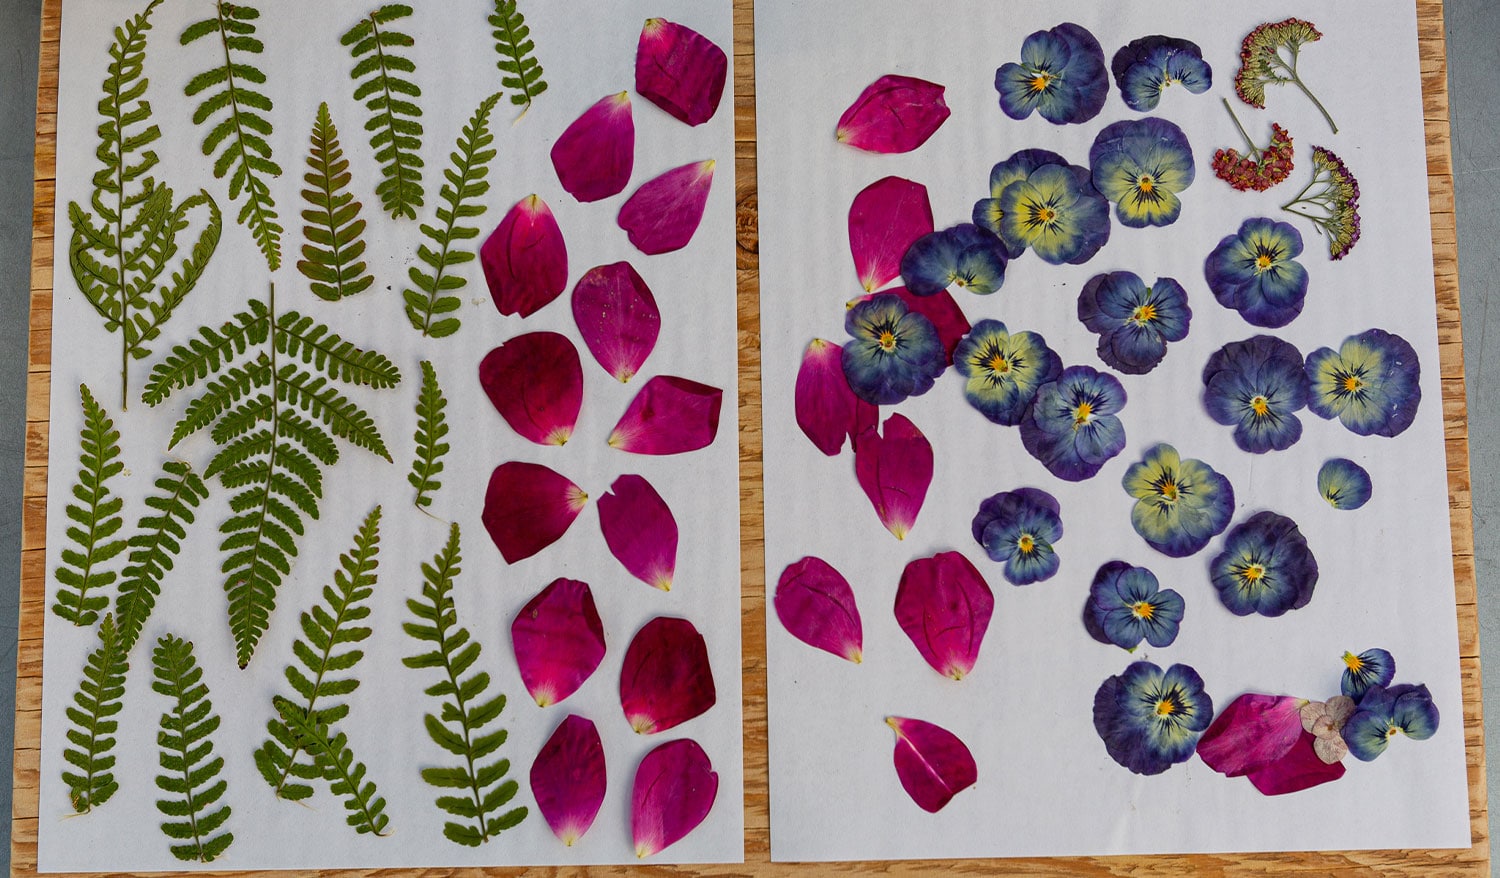 Pressed and dried flowers and ferns